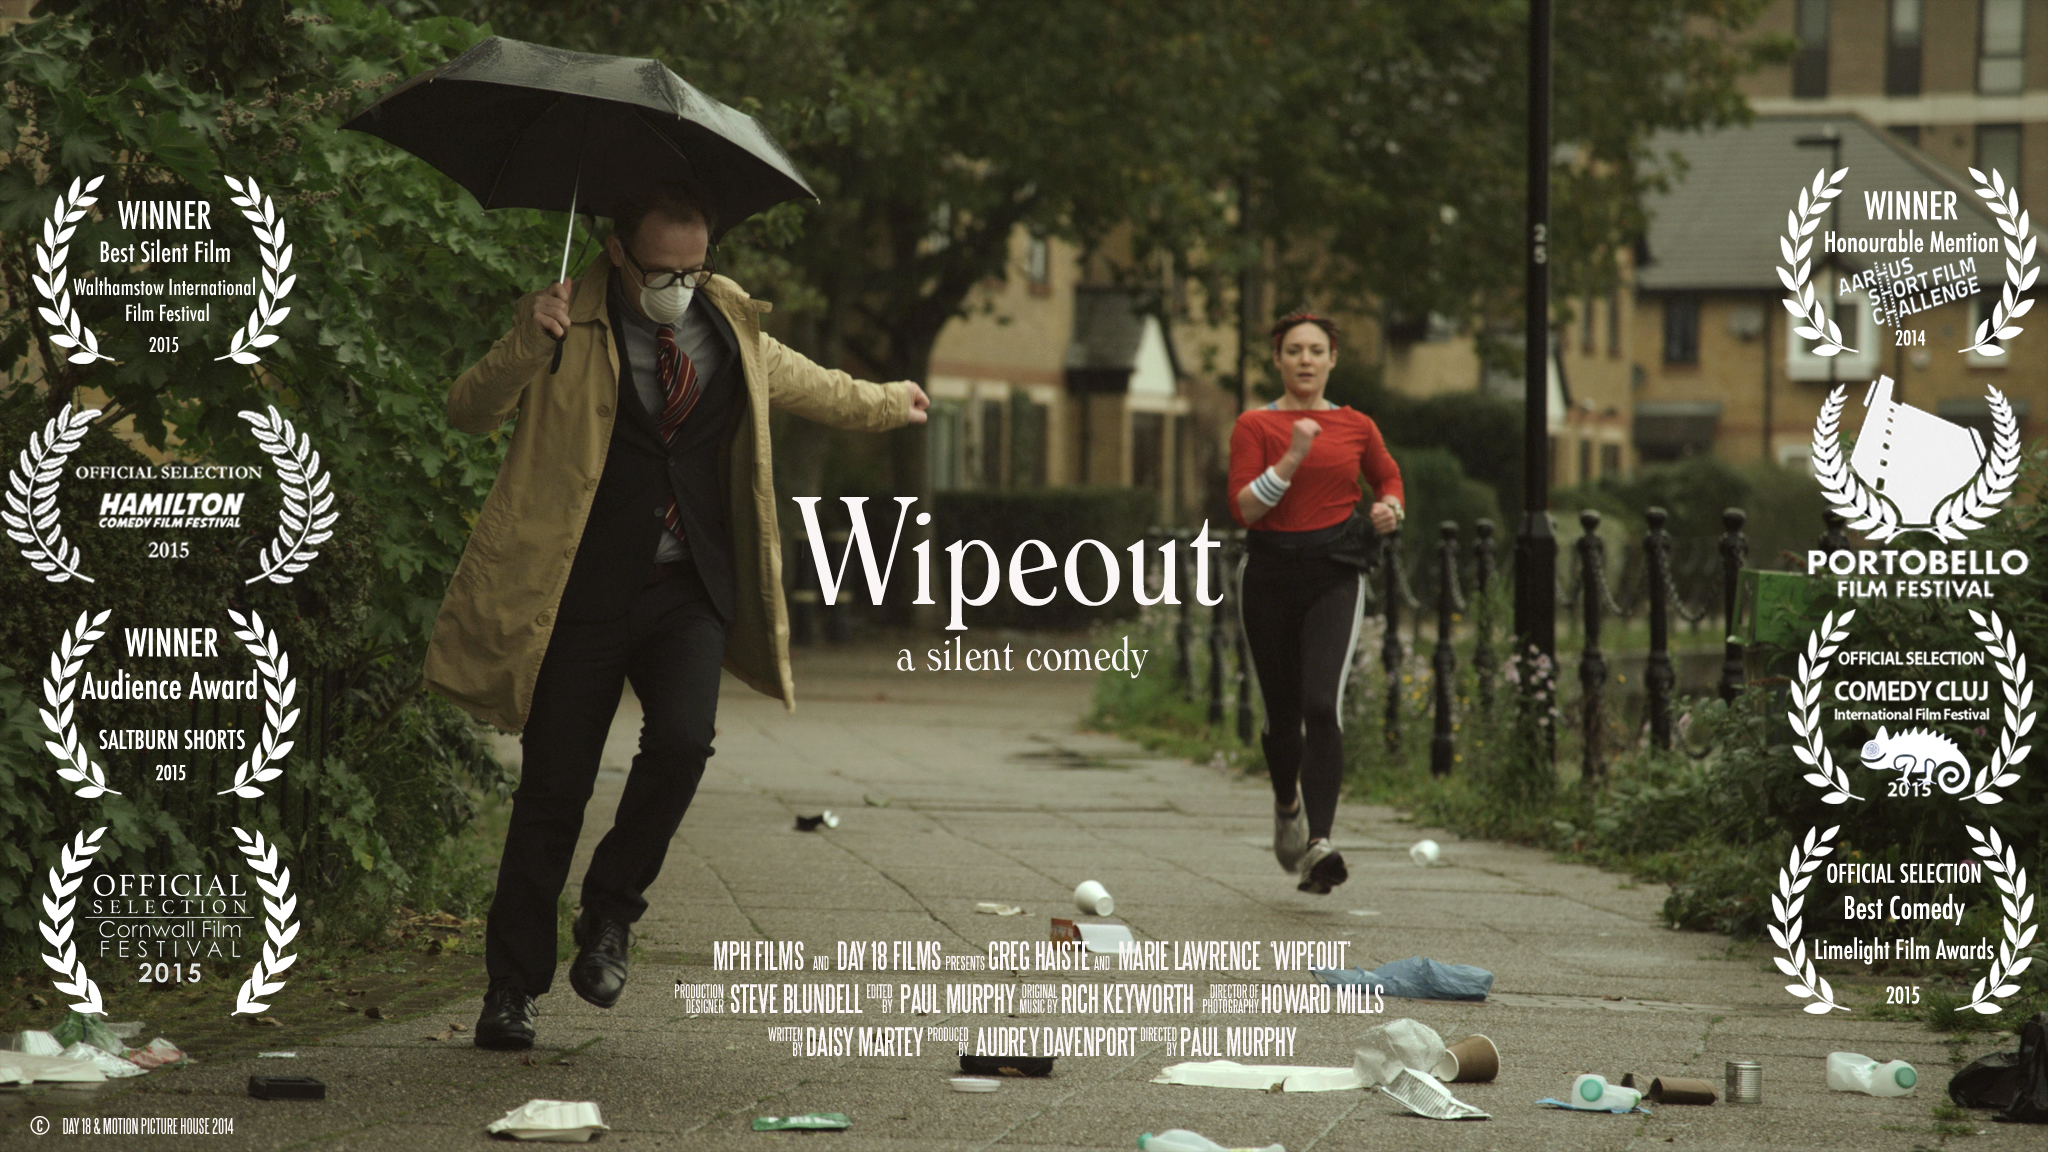 Wipeout - directed by Paul Murphy